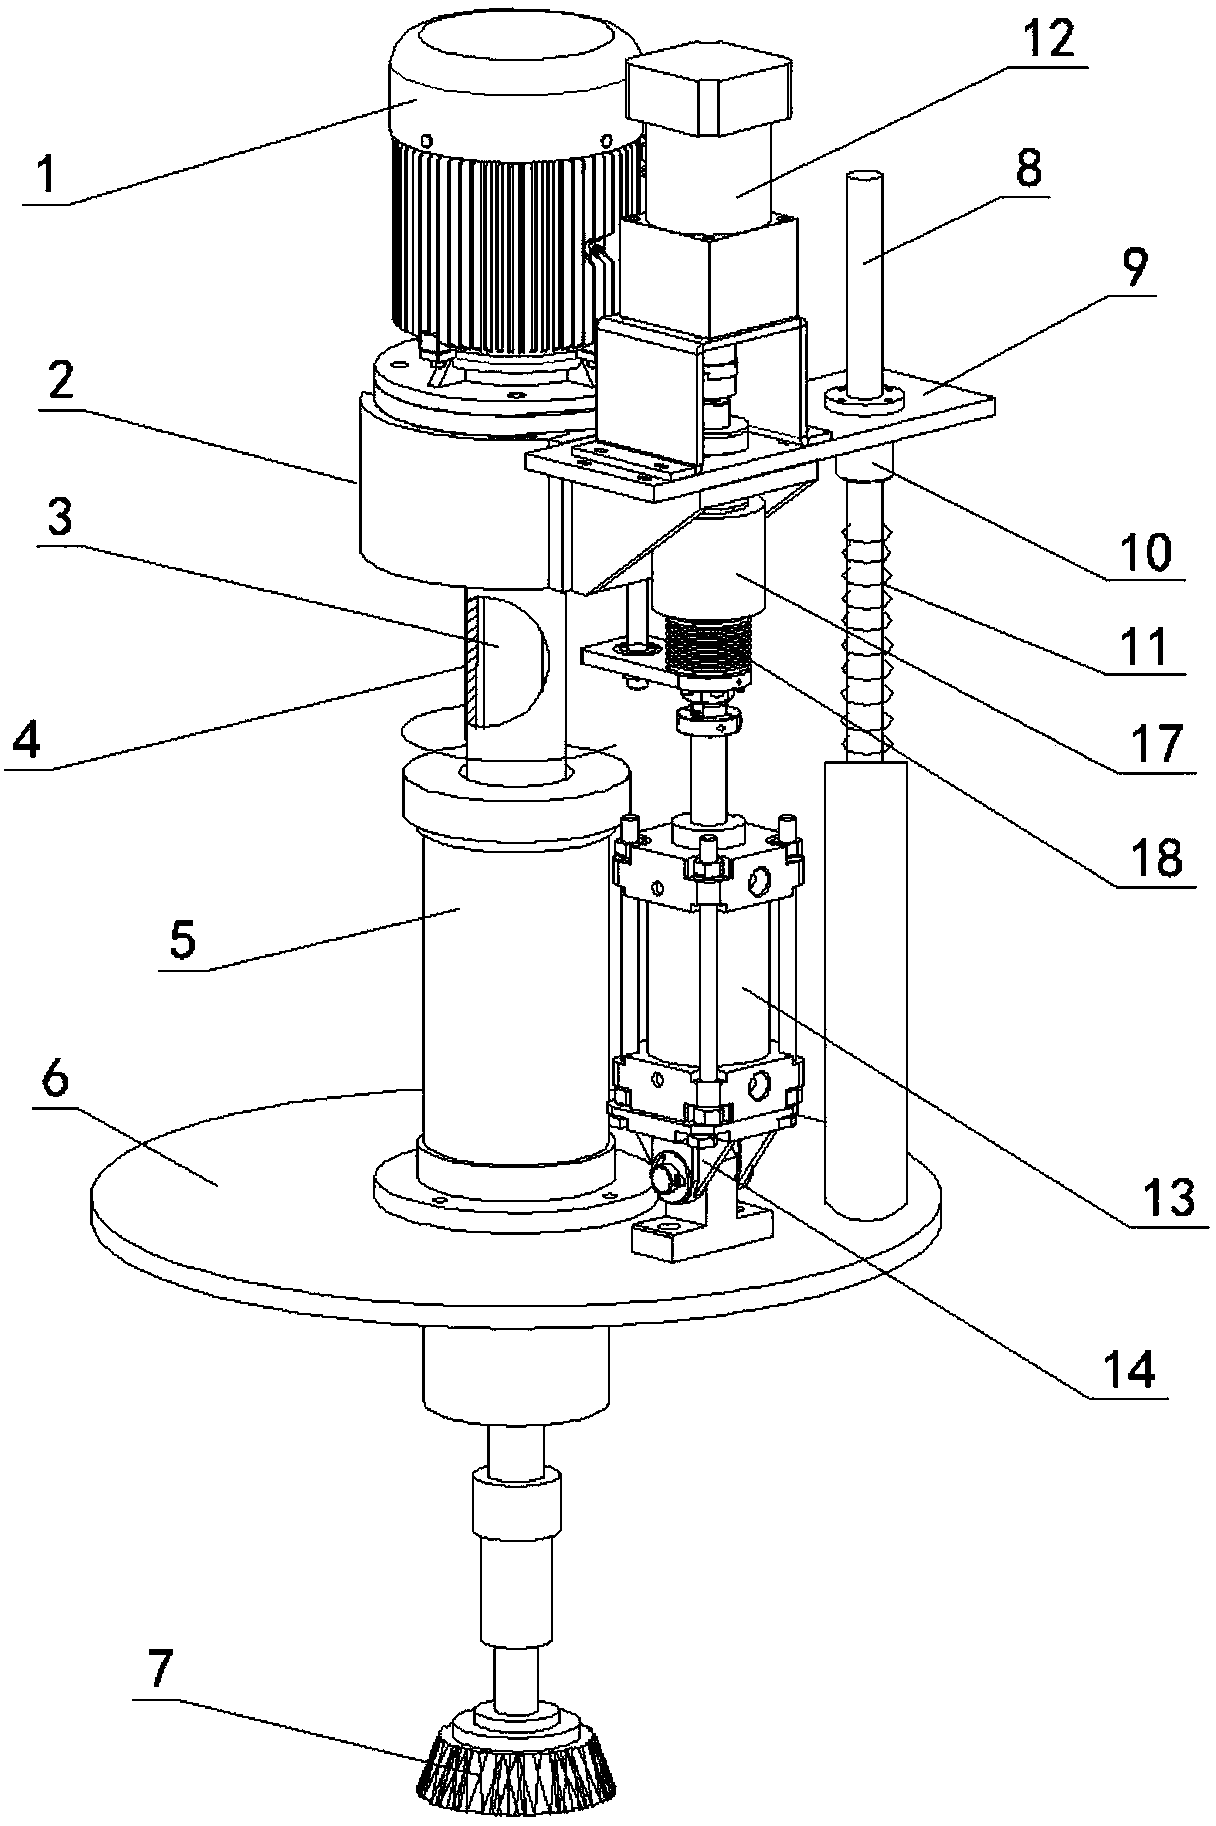 An Automatic Deburring Device with Accurate Compensation